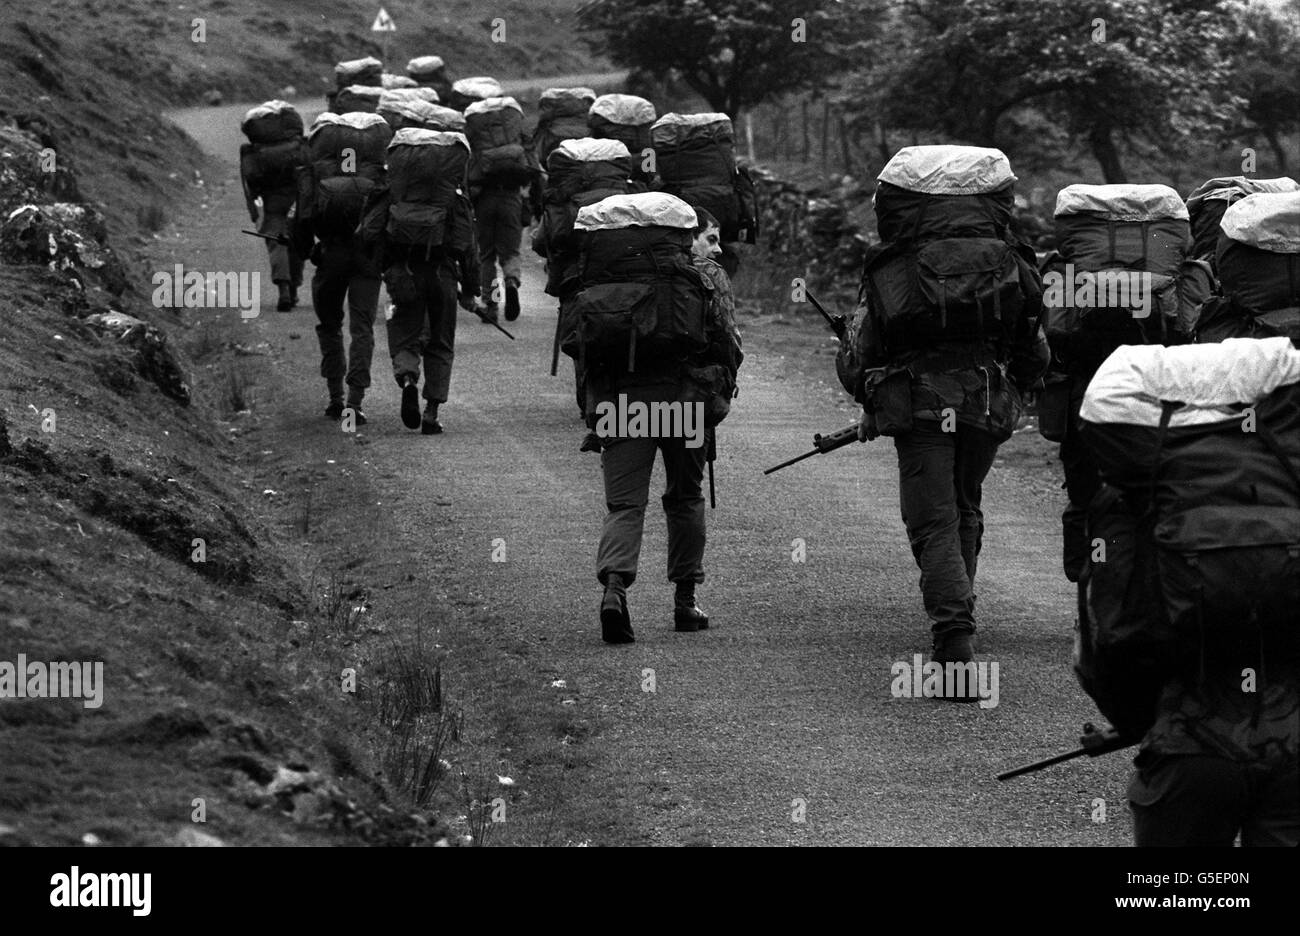 1981: SAS (Special Air Service) recruits with 45lb back packs and 10lb FN rifles having to walk to the top of a mountain peak before the official start of an endurance march across country because the track is too steep for an Army truck. A recruit who ate a 1lb chocolate bar, making his pack lighter, had to carry a 2lb rock instead. Stock Photo